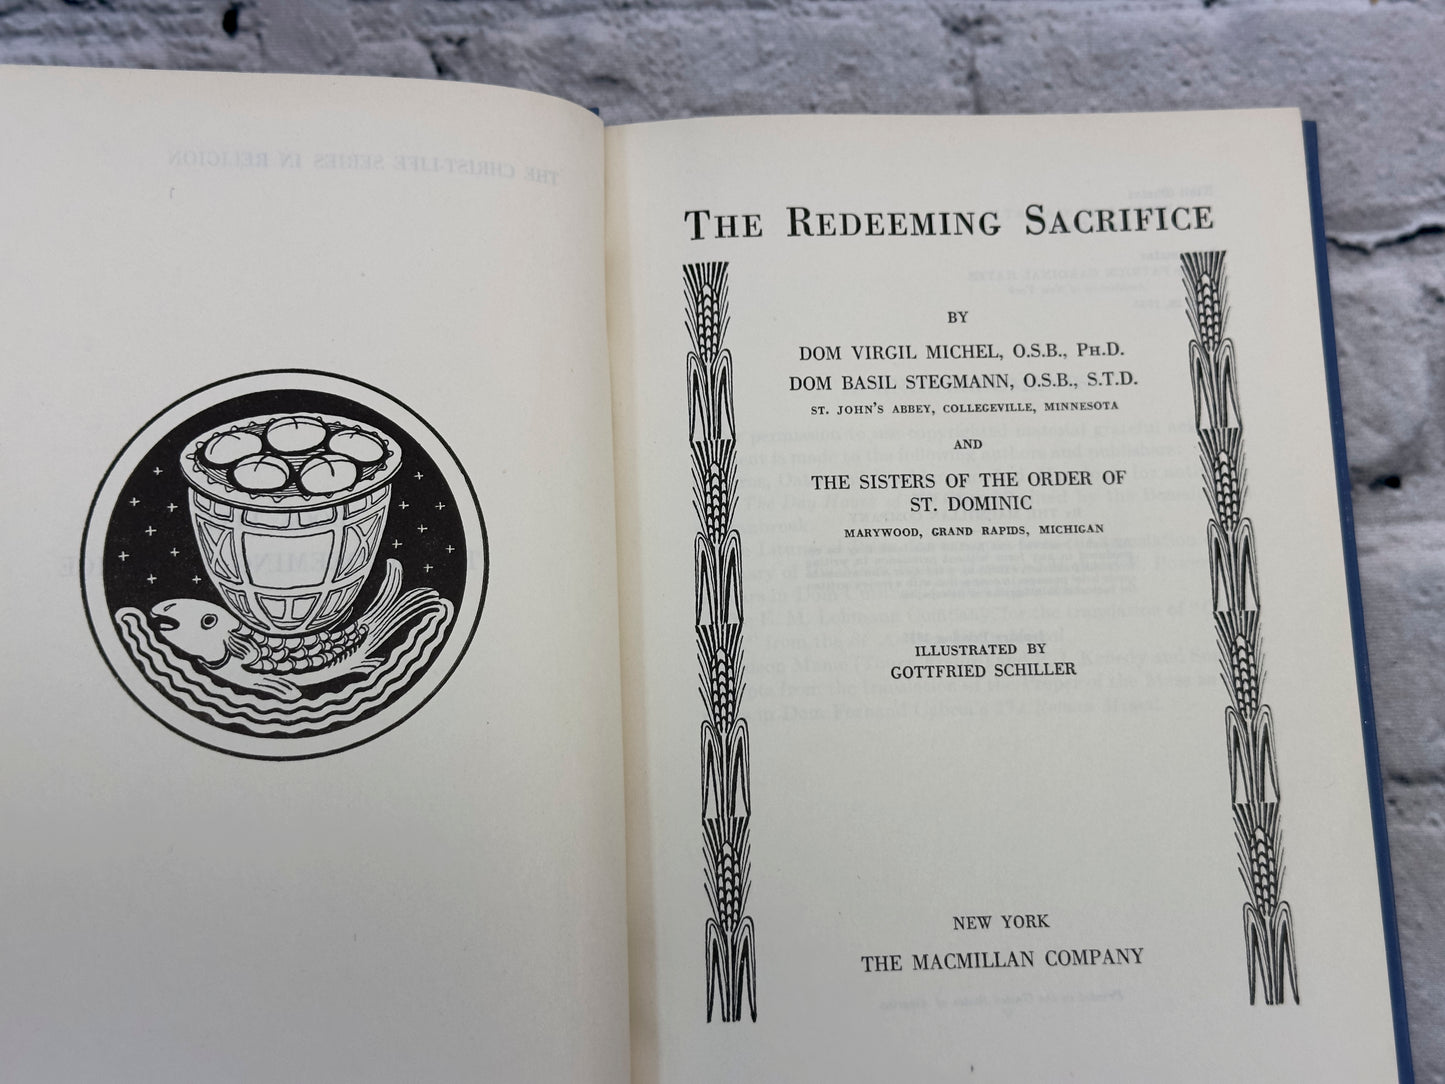 The Redeeming Sacrifice: The Christ-Life Series Book 5 by Dom Basil Michel [1955]